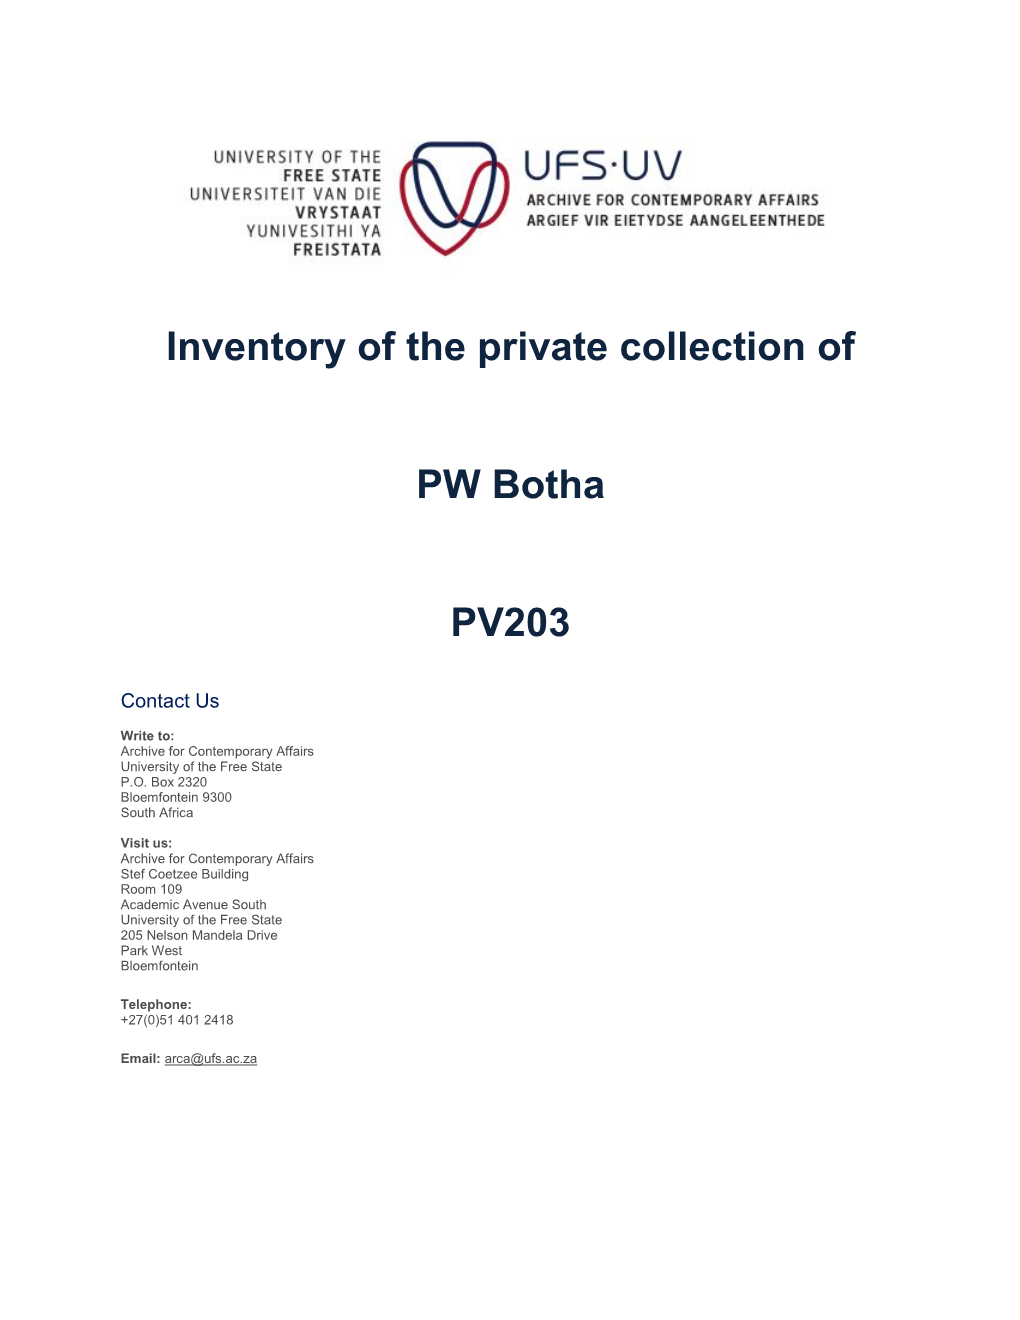 Inventory of the Private Collection of PW Botha PV203